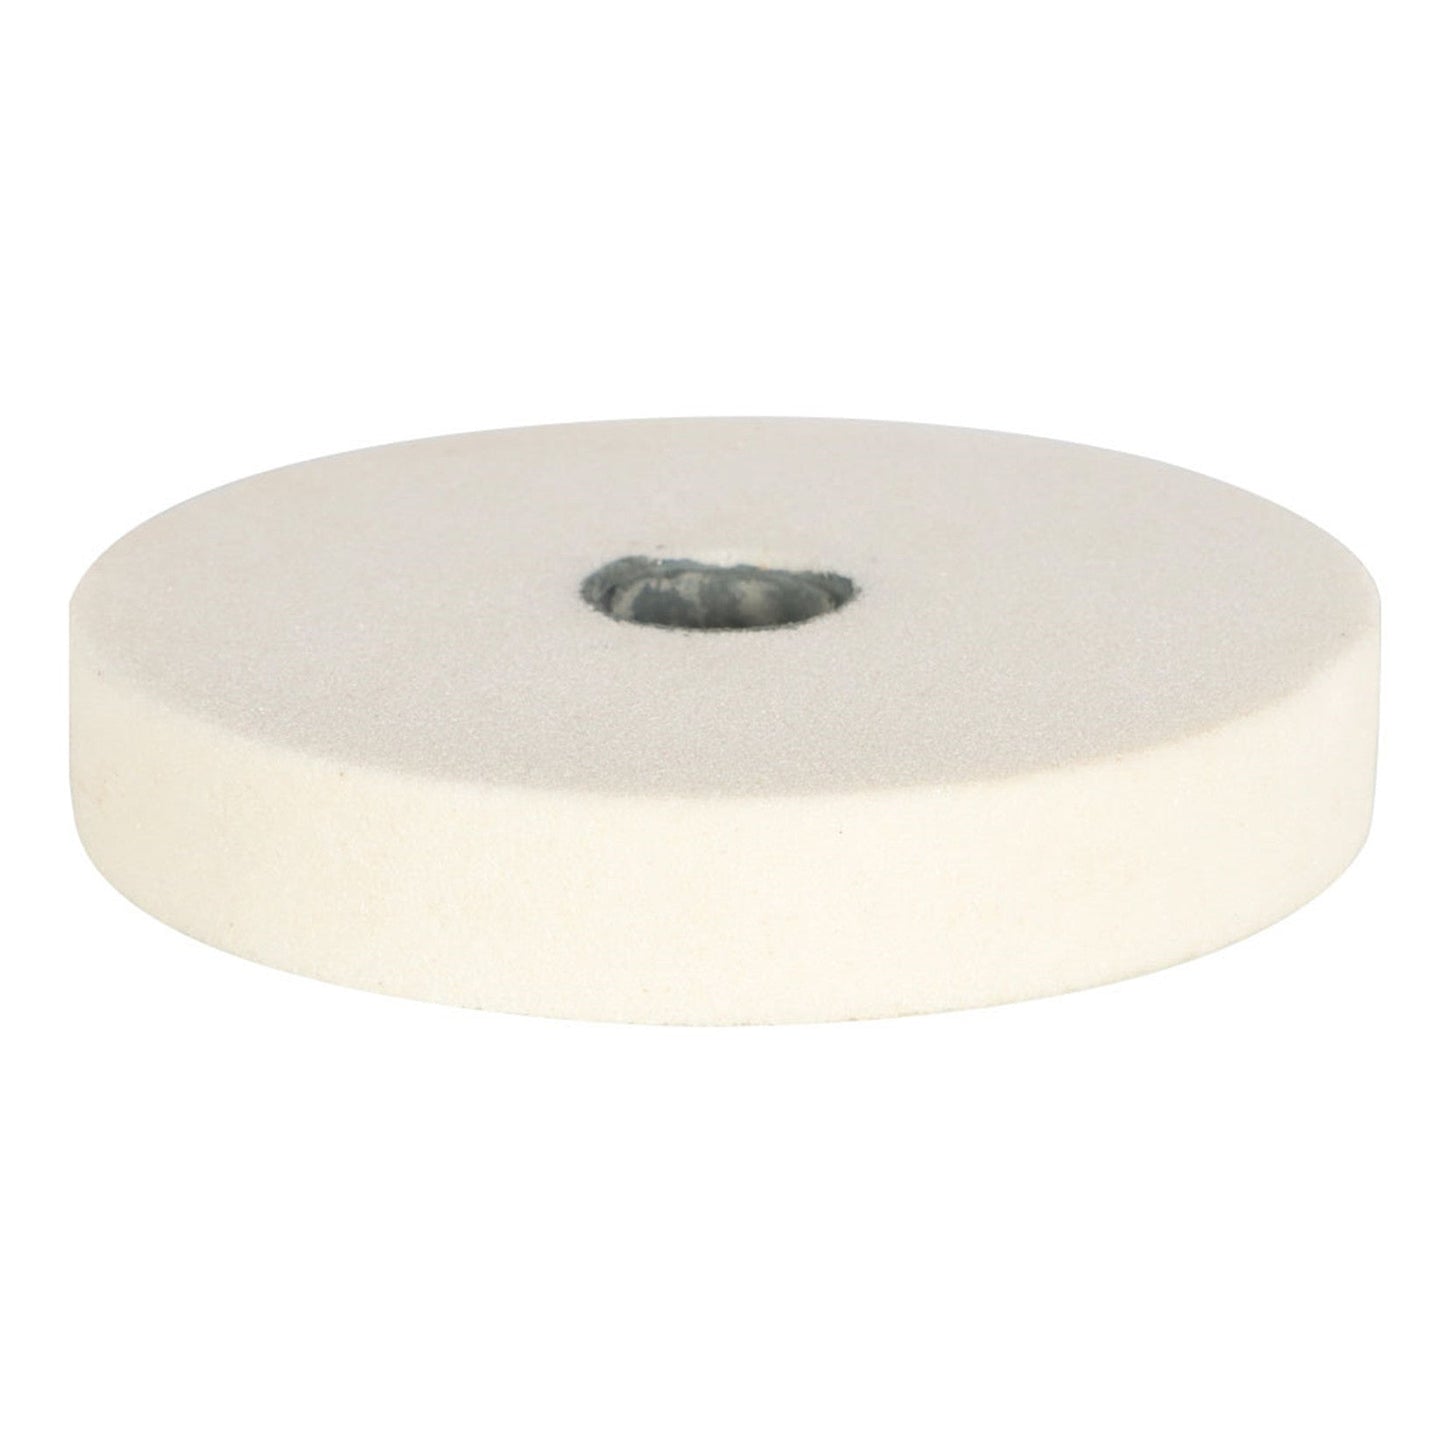 6-Inch by 1-Inch, 1-Inch Arbor, White Aluminum Oxide Grinding Wheel 60 Granulari FINDMALLPARTS